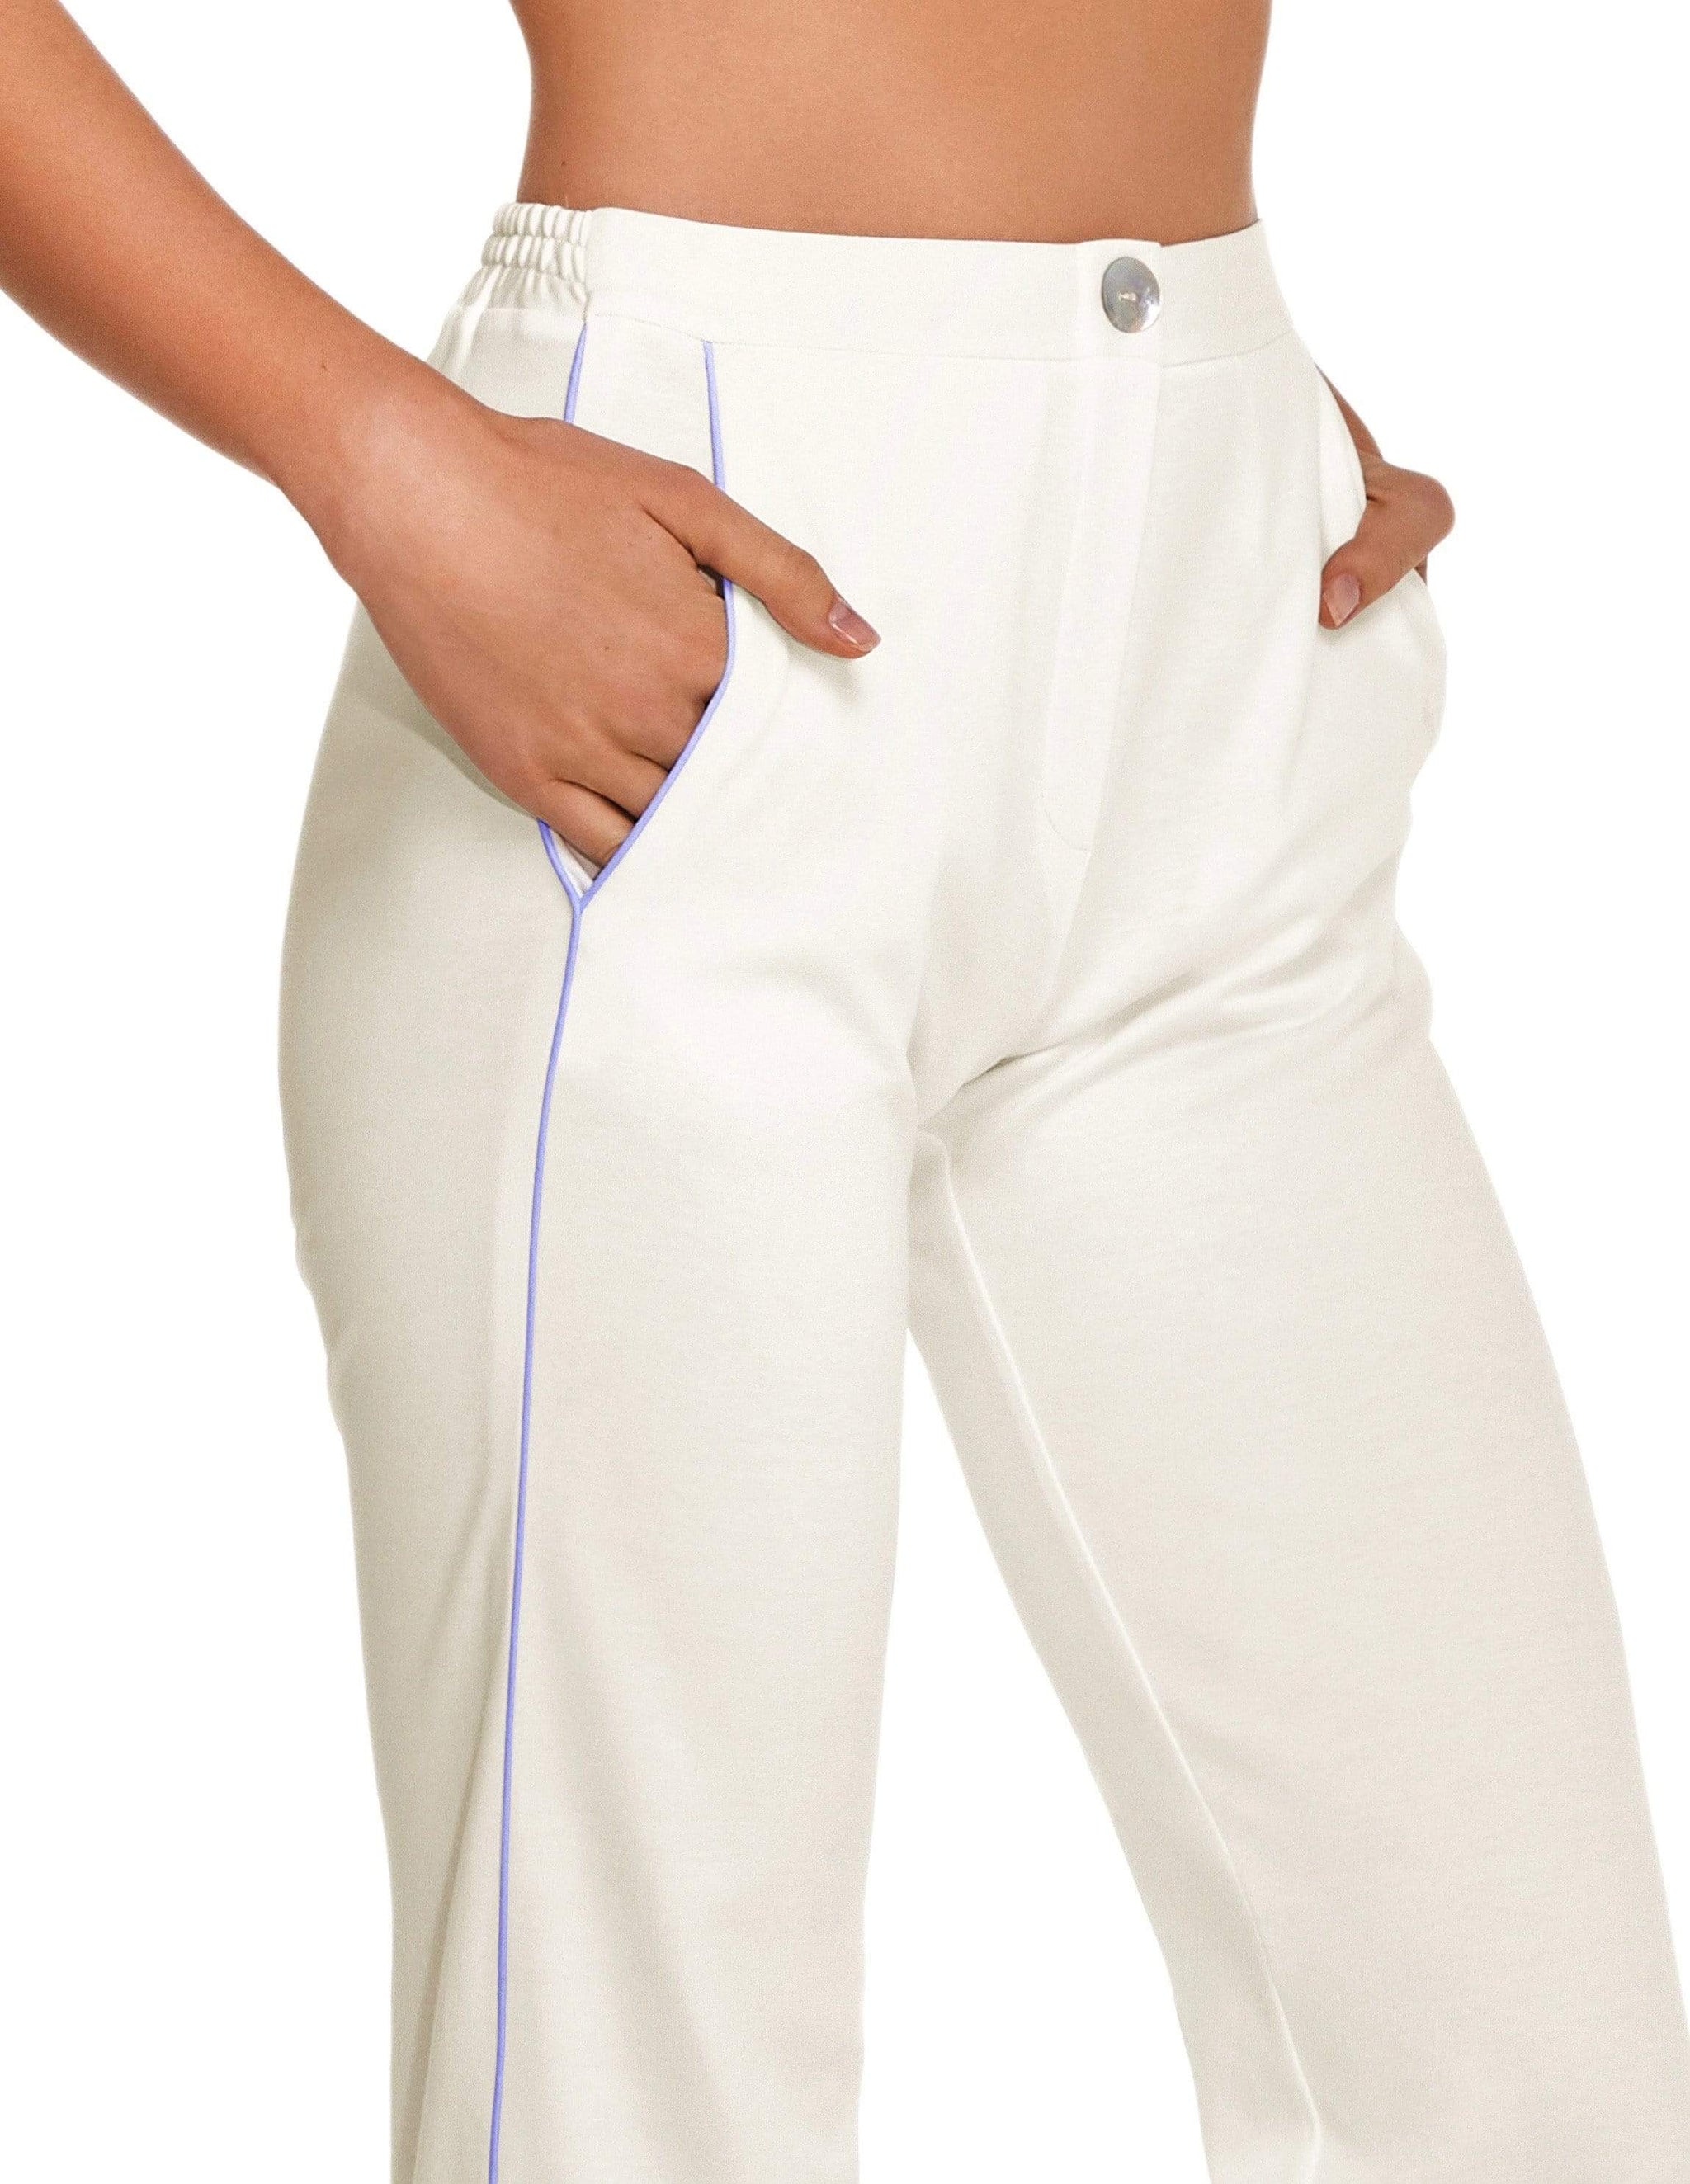 Slow Nature® Essentials Sleep & Loungewear PANTS in Organic Cotton. sustainable fashion ethical fashion